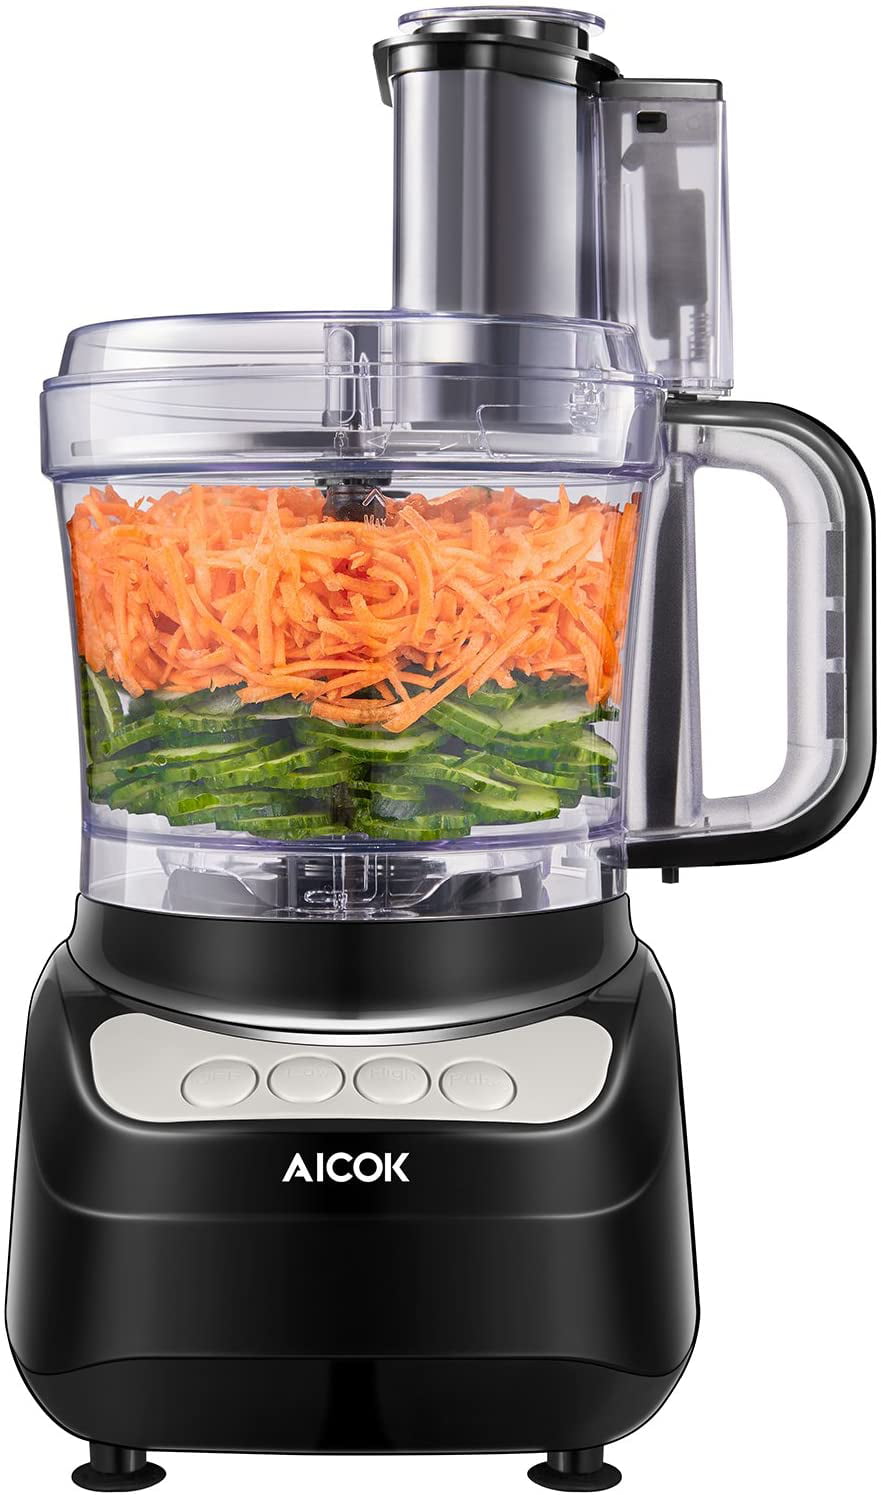 AICOK Food Processor, Compact Food Processor, Multifunctional 12 Cup  Electric Food Chopper, 4 Speed Controls Food Shredder, Chopper with Blade,  